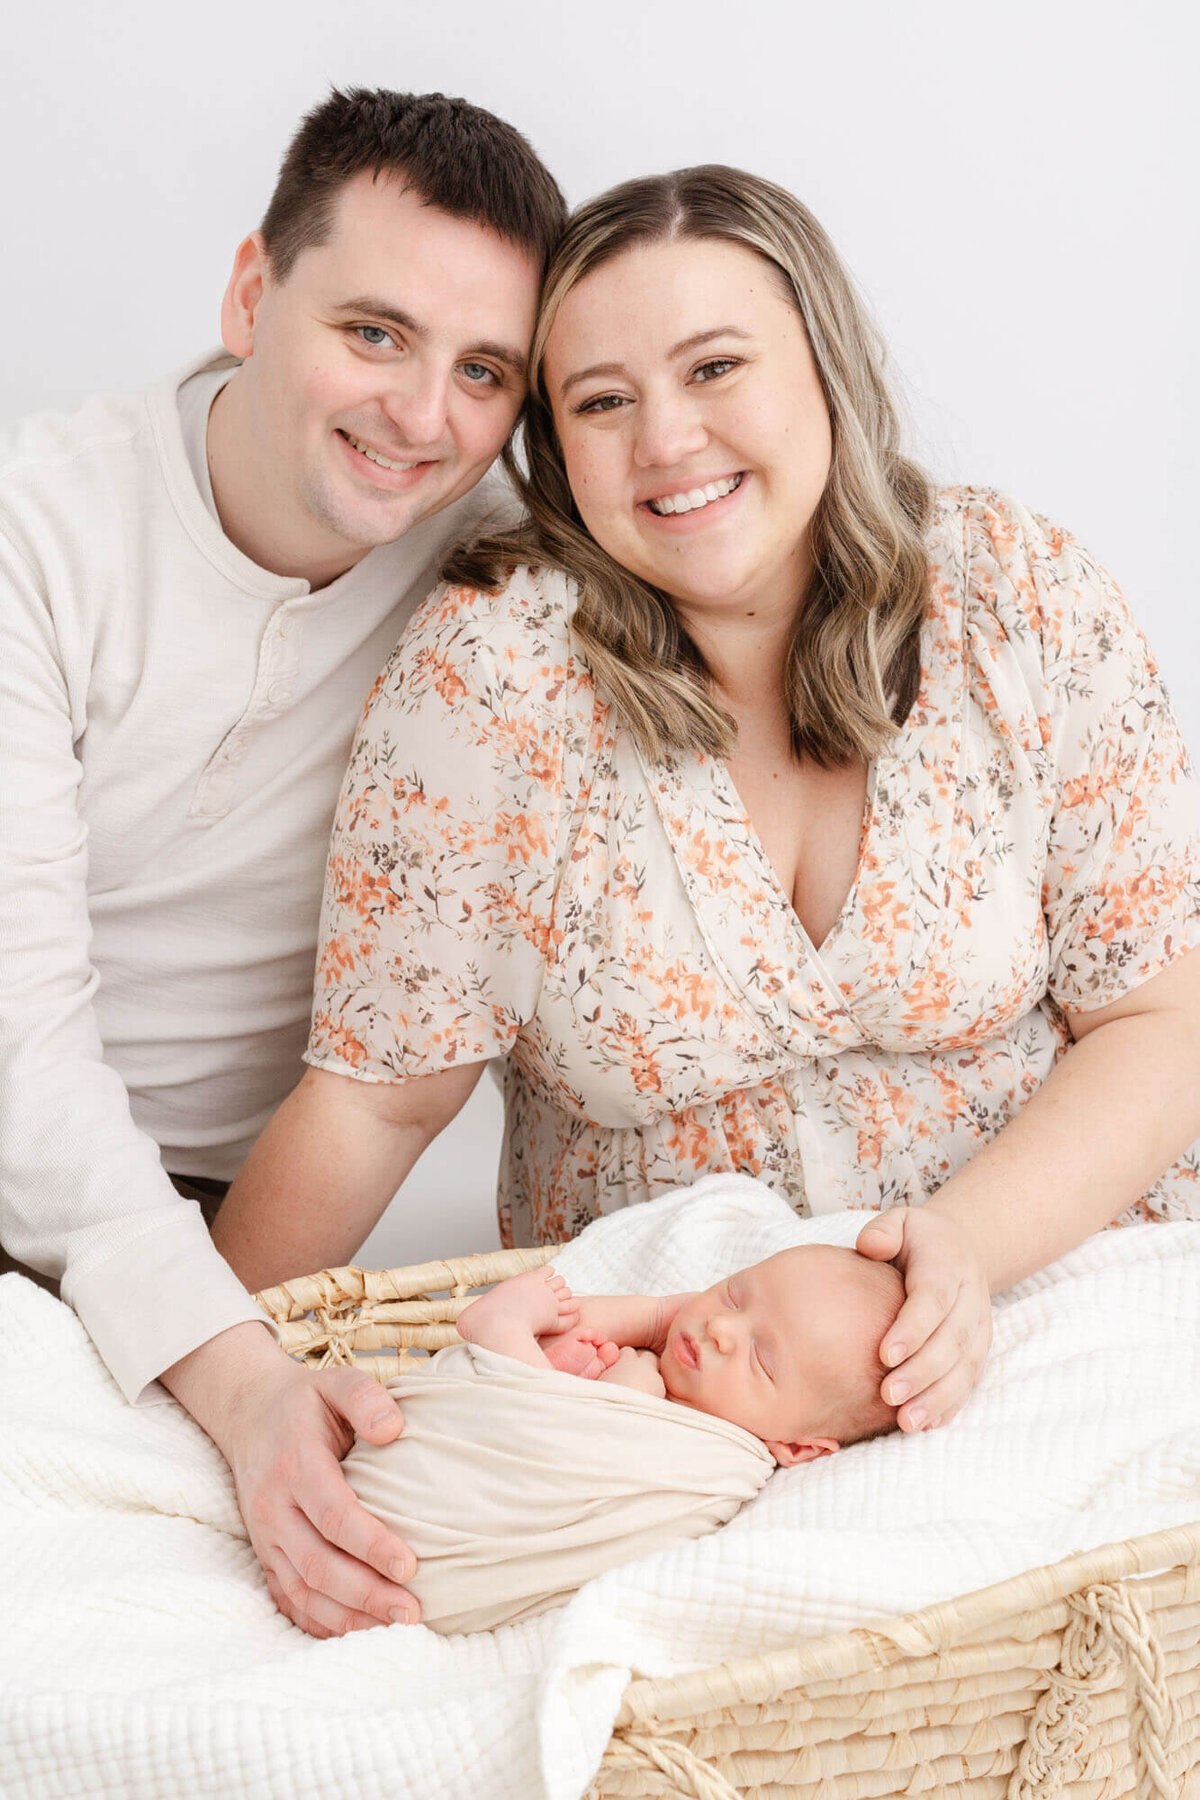 New Mom and New Dad are  sitting behind a Moses Basket with their newborn baby who is wrapped in a beige swaddle. Mom has her hand on baby's head and dad has his hand on baby's bottom. Mom and dad are sitting close together with their foreheads touching and they are both smiling proudly at the camera.